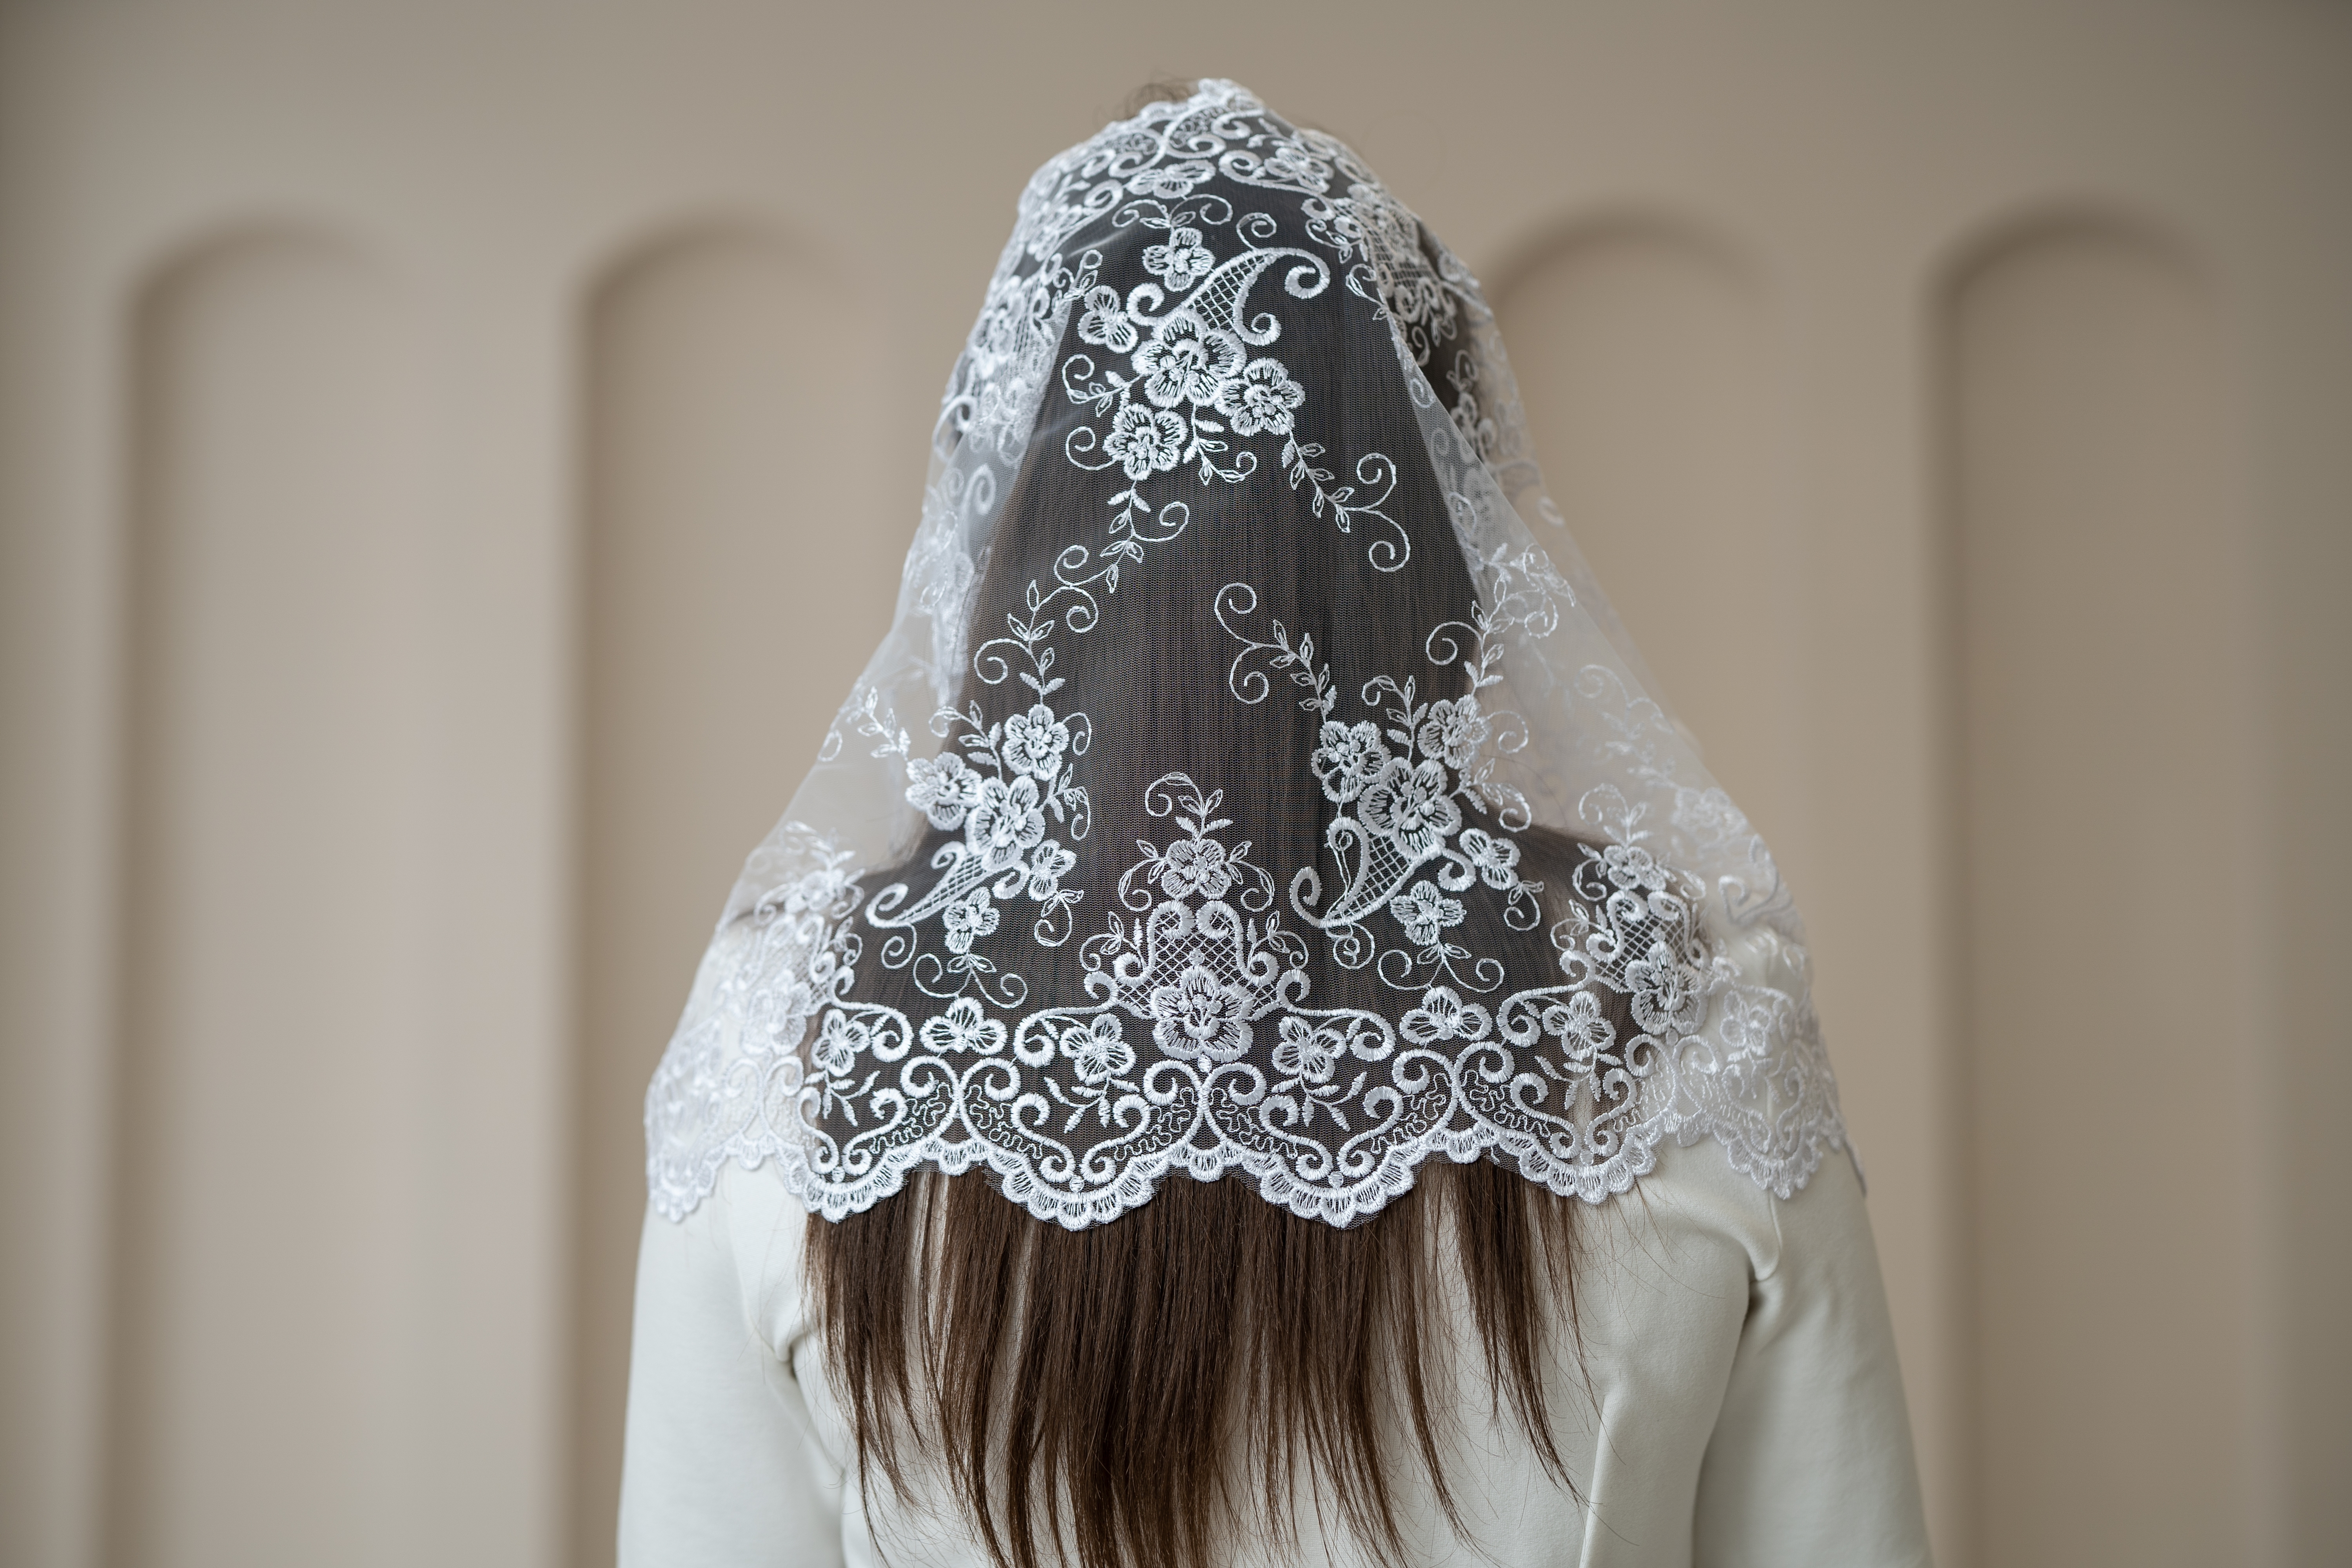 Bride with a veil. | Source: Shutterstock